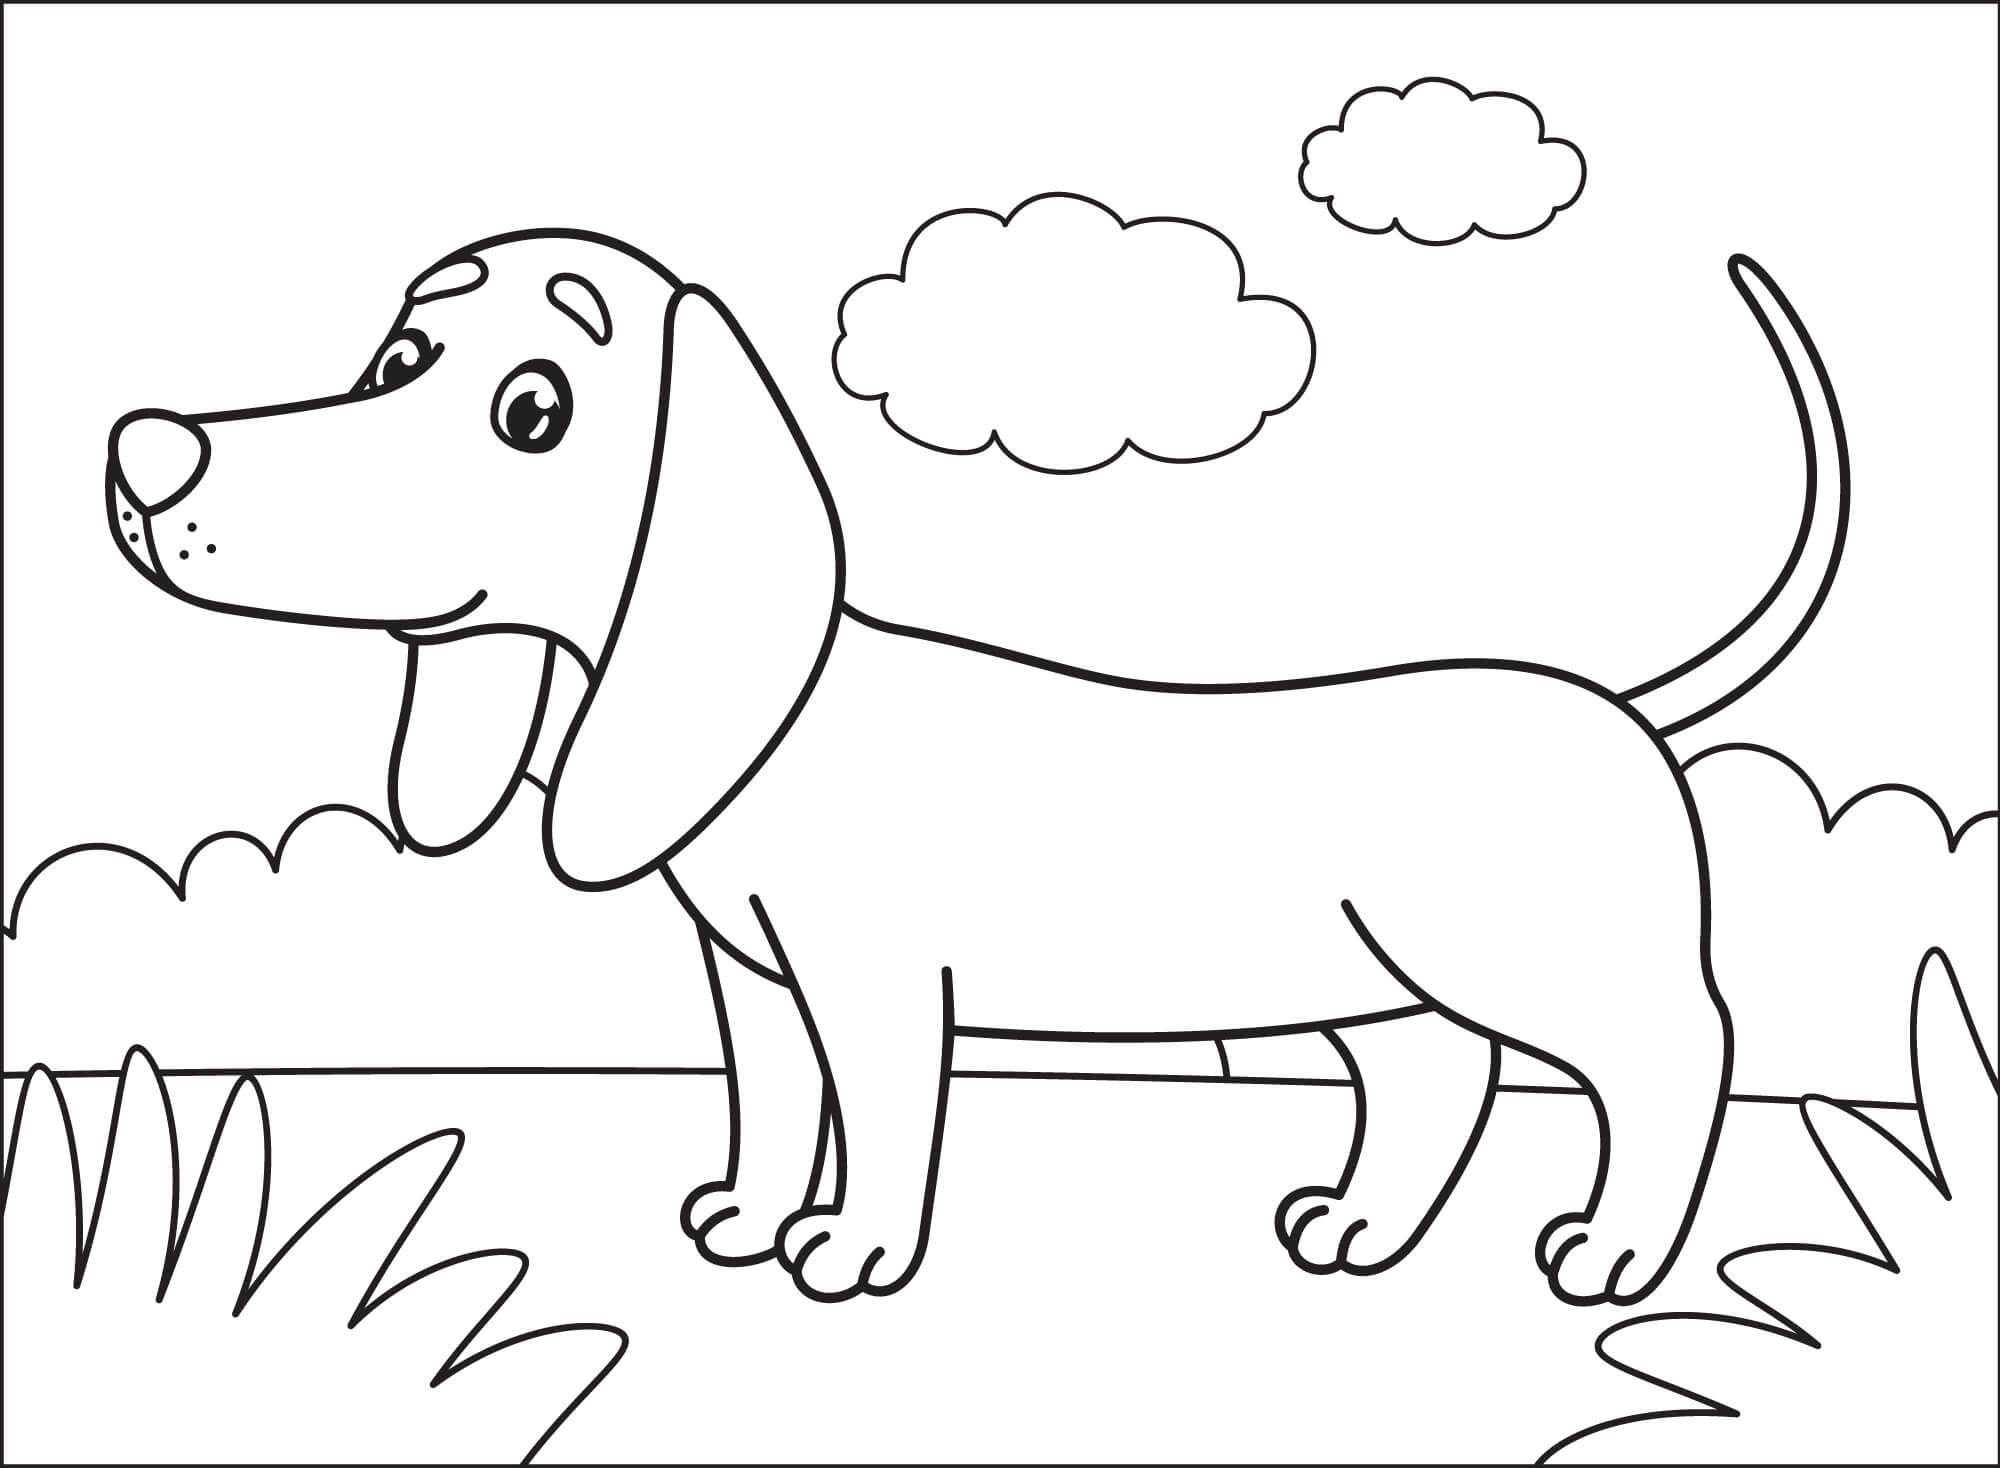 Dachshund Puppy Birthday Coloring Page / How To Draw A Dachshund Puppy